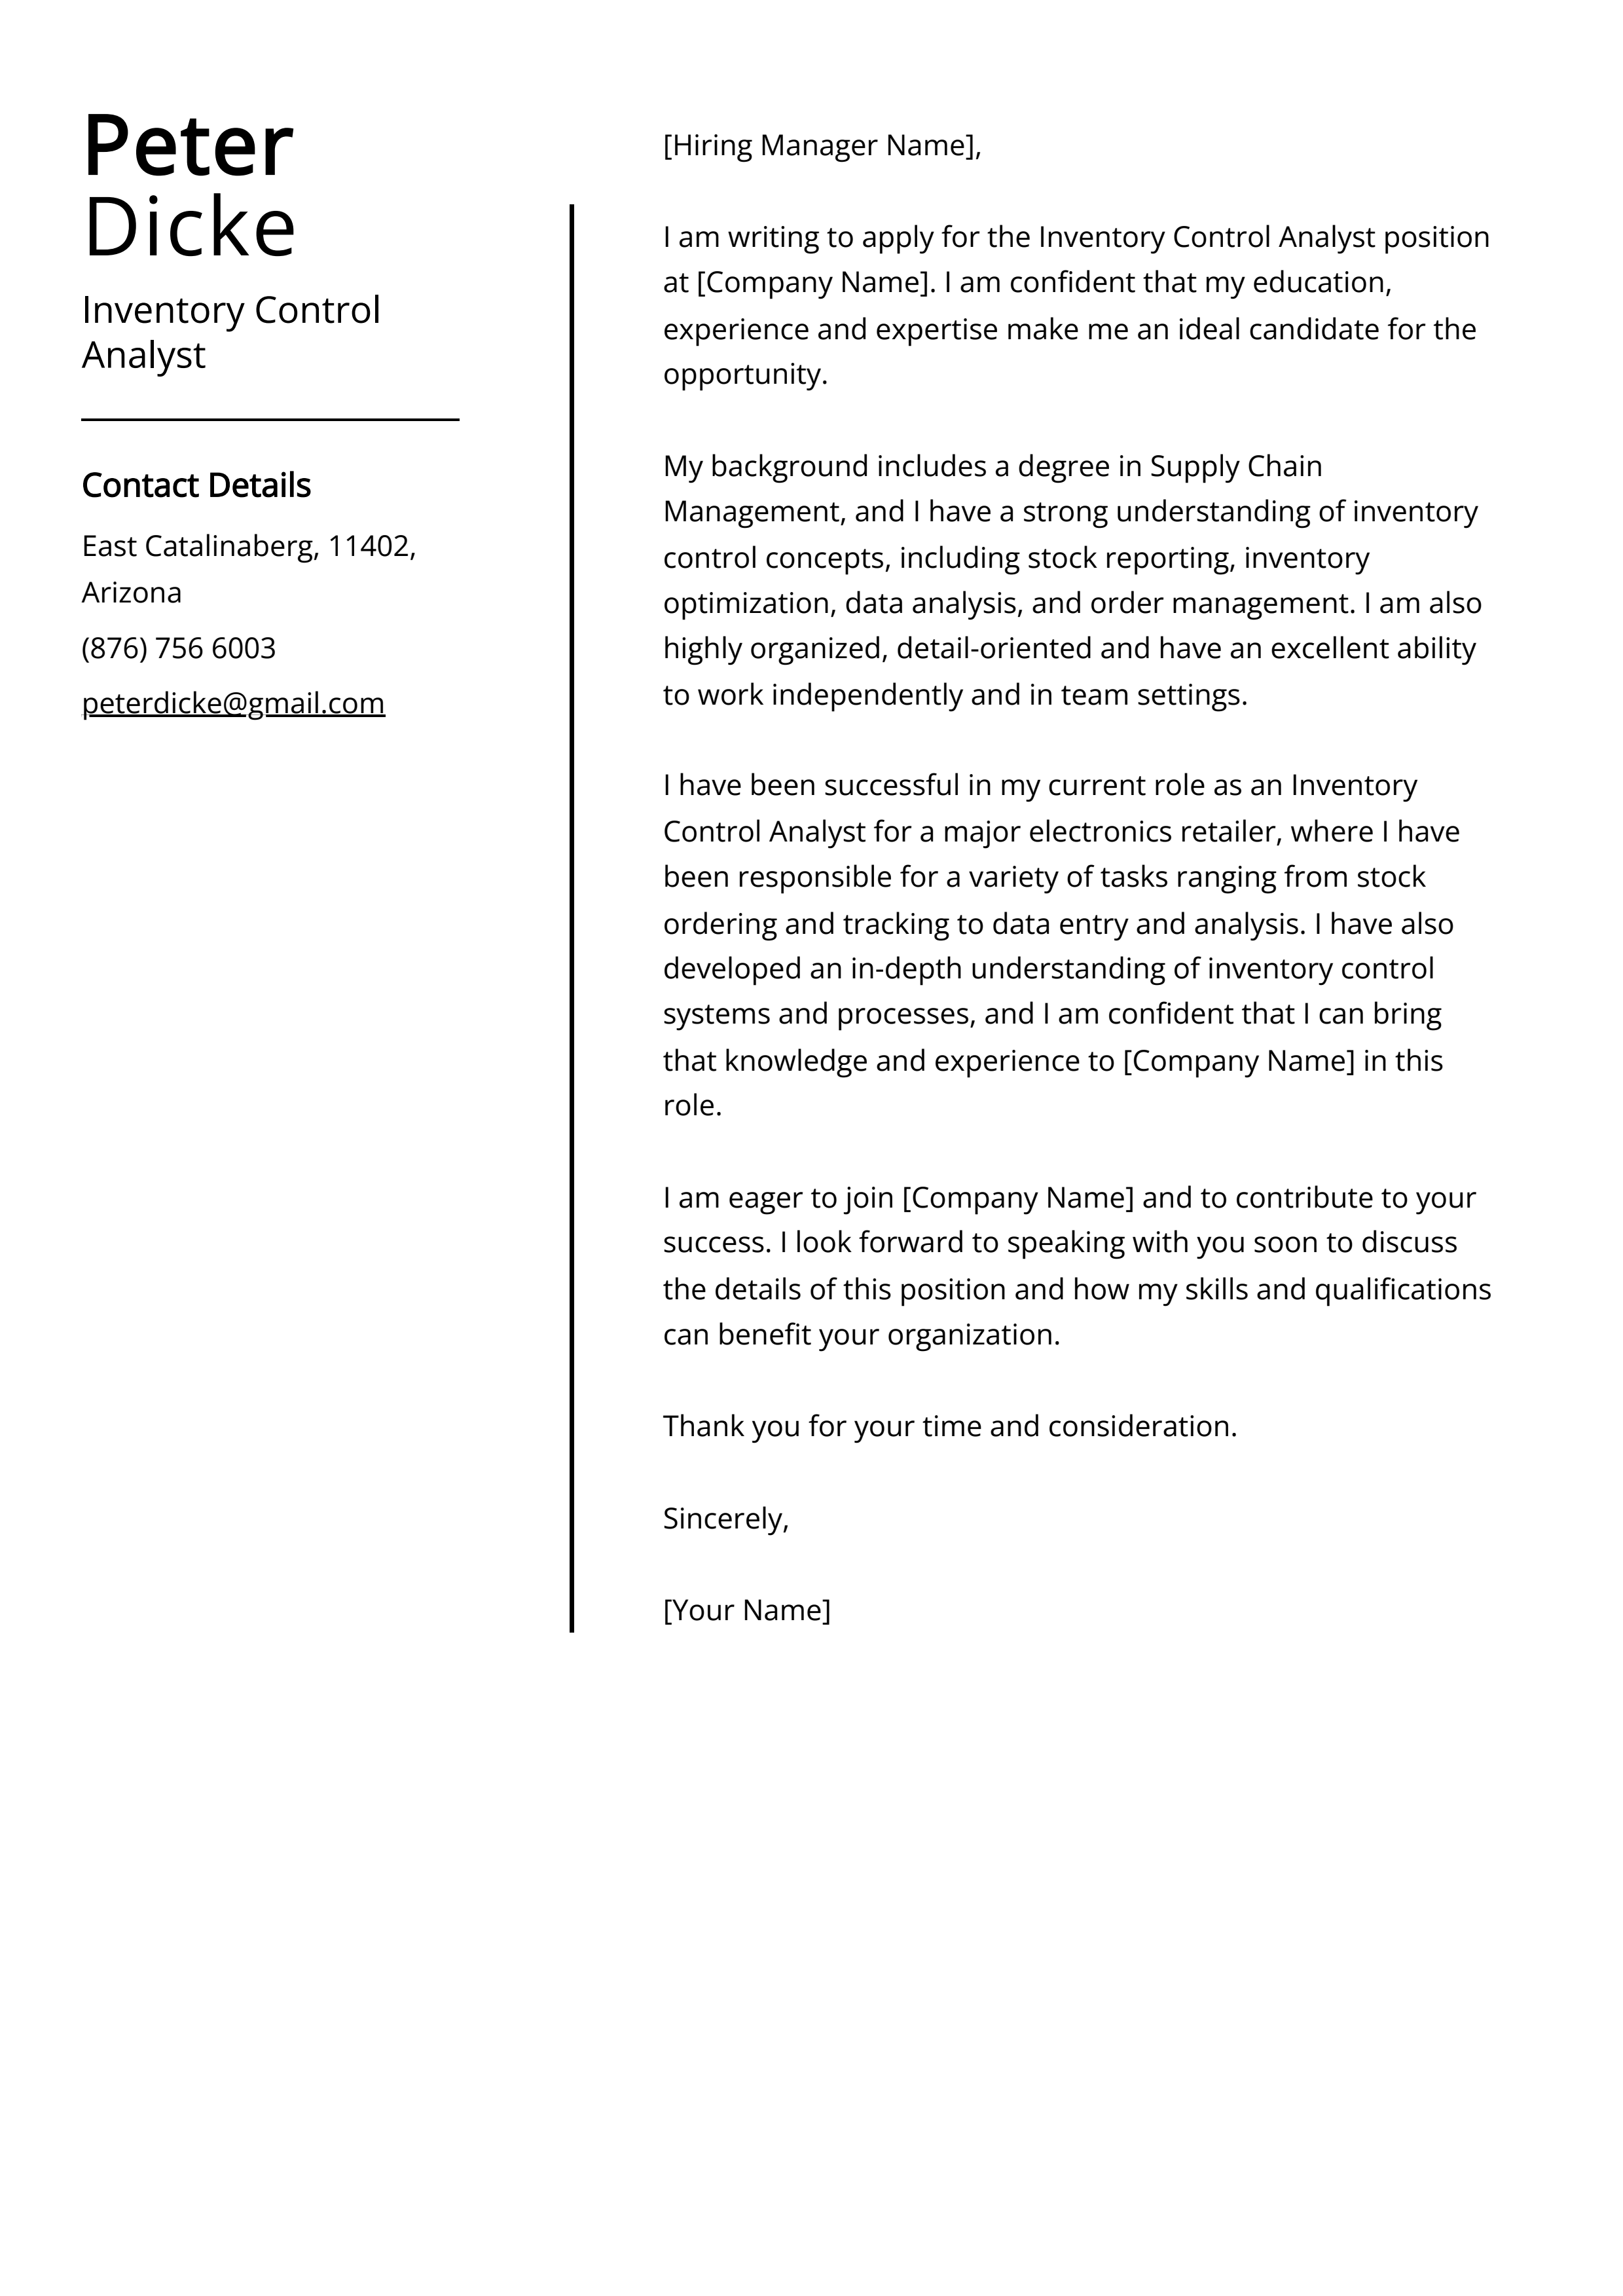 Inventory Control Analyst Cover Letter Example